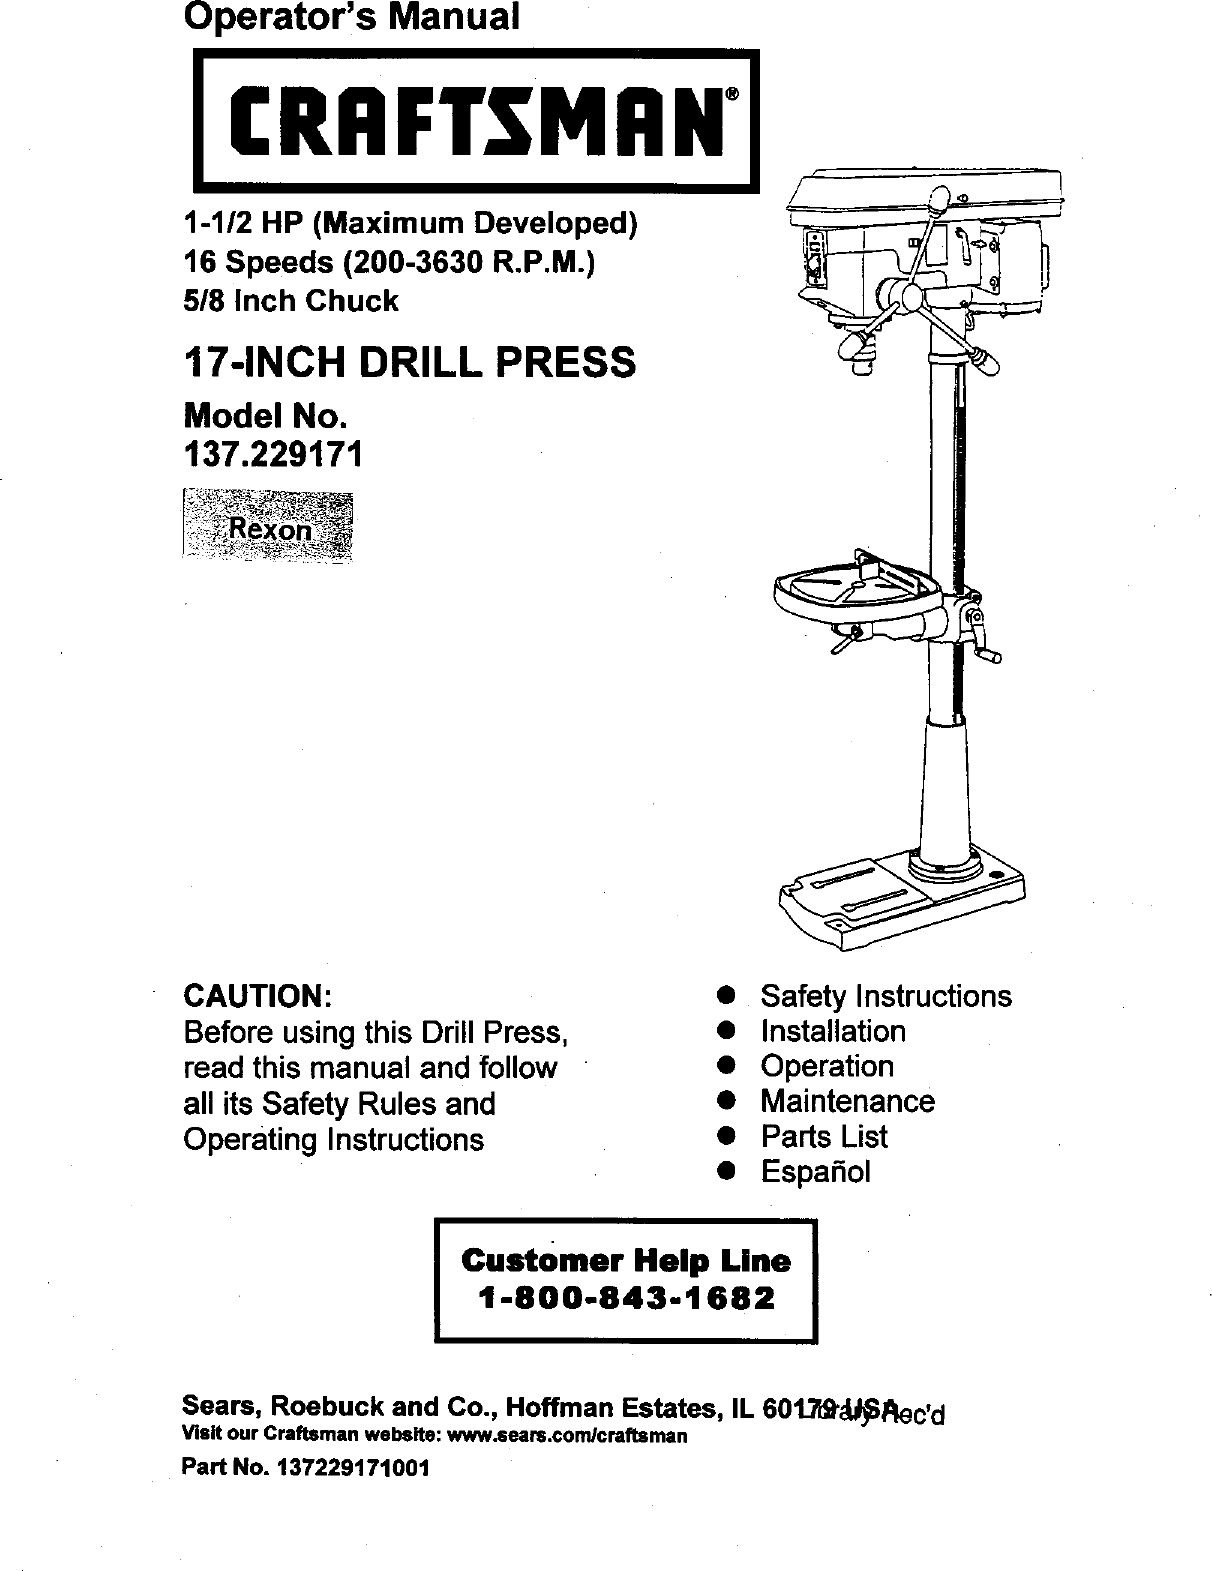 CRAFTSMAN The Drill Press Handbook Learn how to operate 100 different ways 0187 